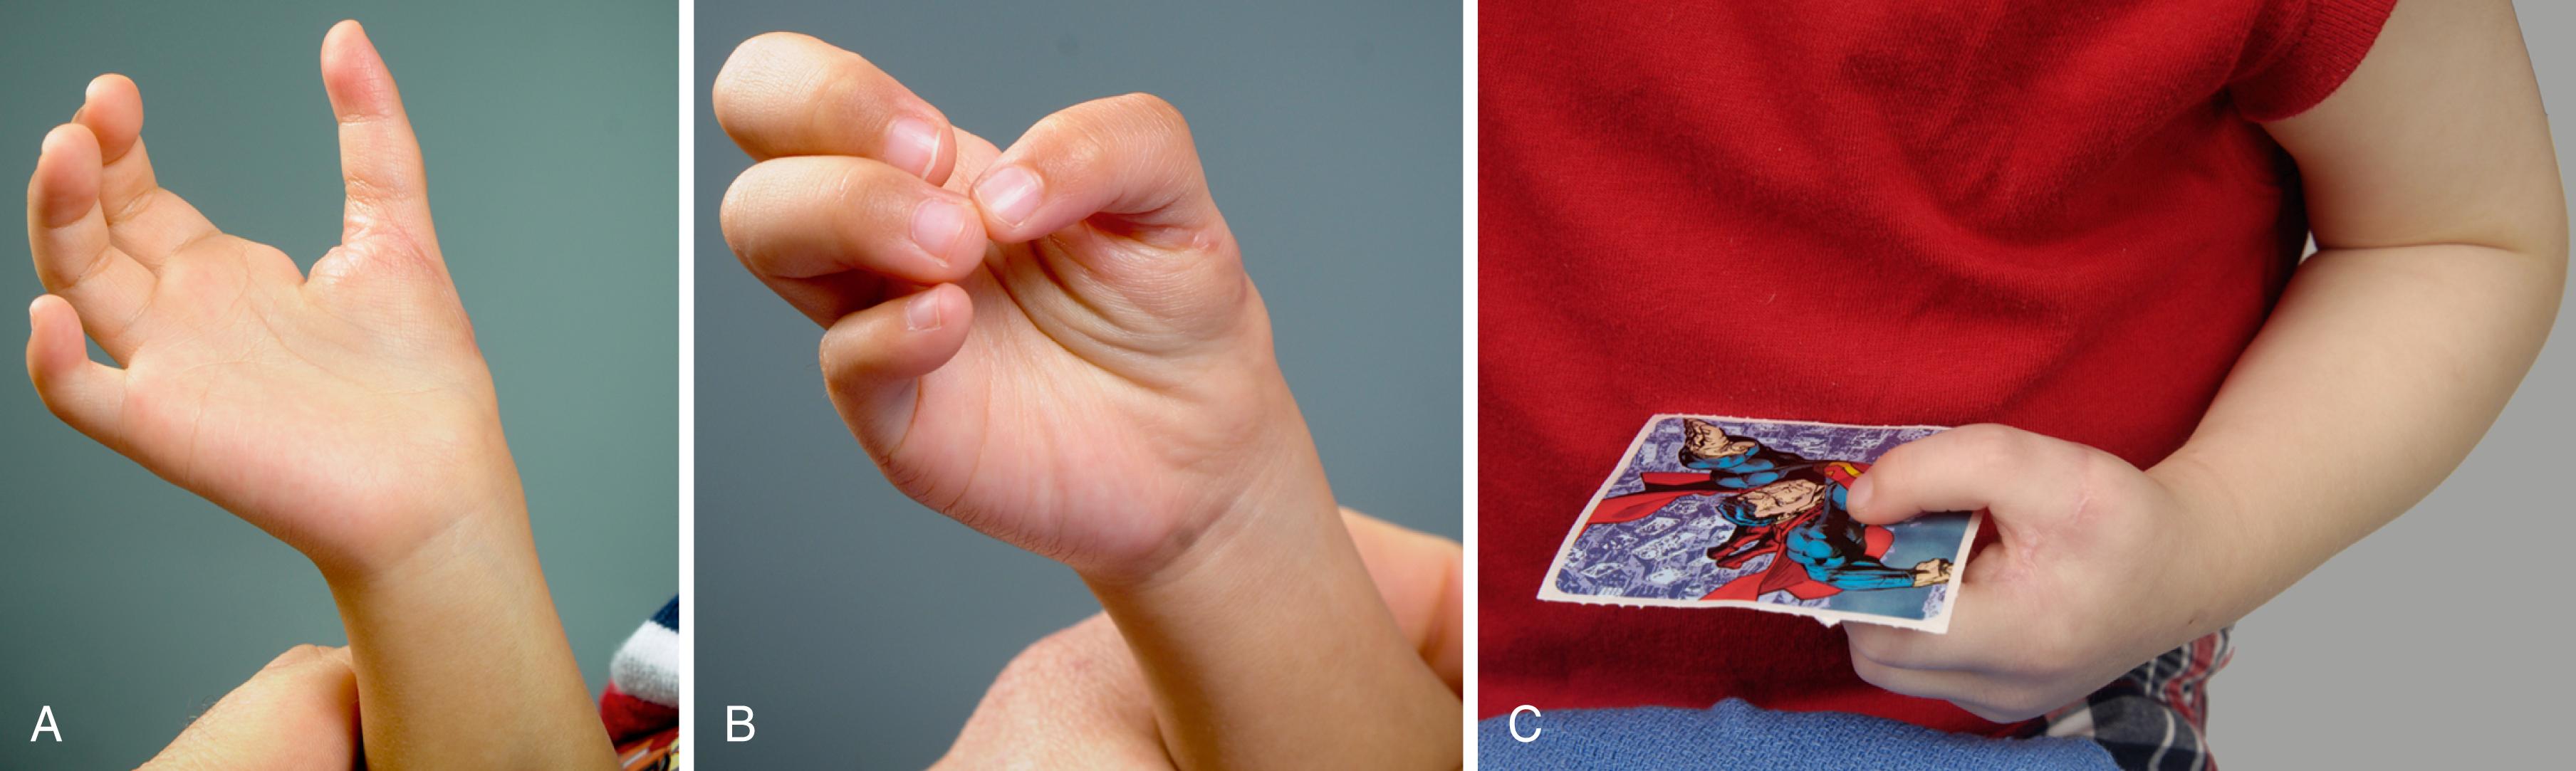 Fig. 37.37, A 3-year-old following index finger pollicization. A, Overall appearance. B, Movement pattern. C, Pinching a sticker.